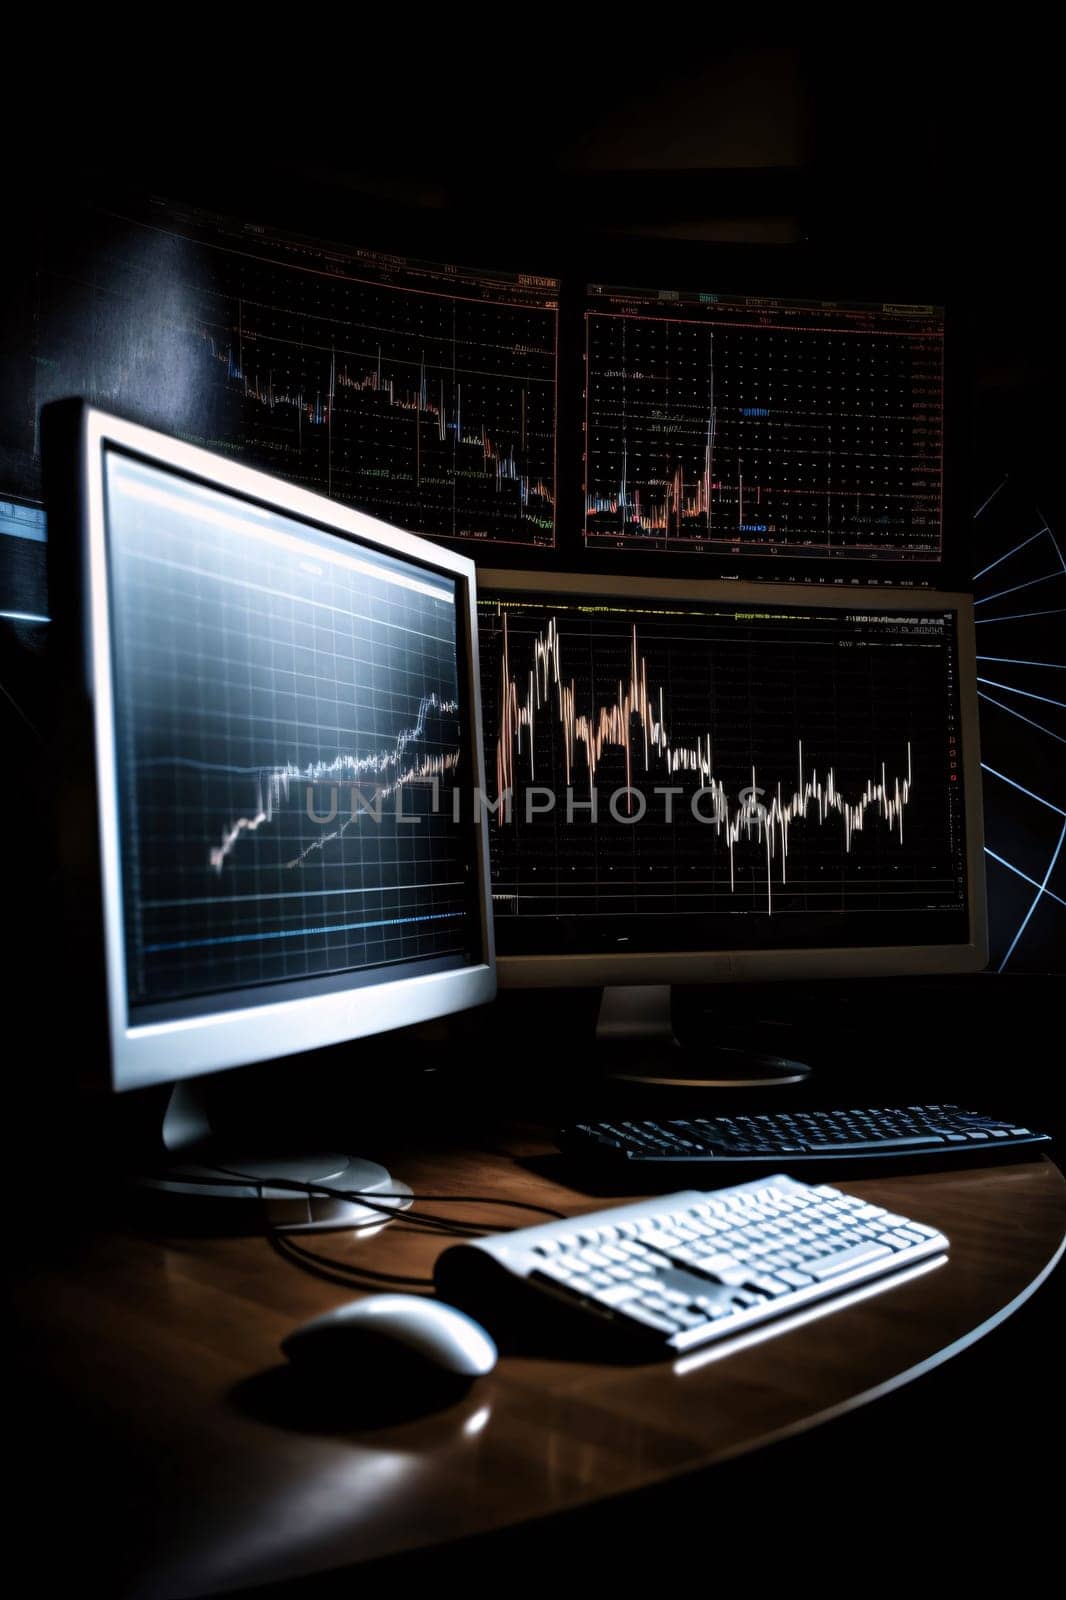 Stock Market: Computer monitor with stock market chart on screen. Stock market or forex trading concept.